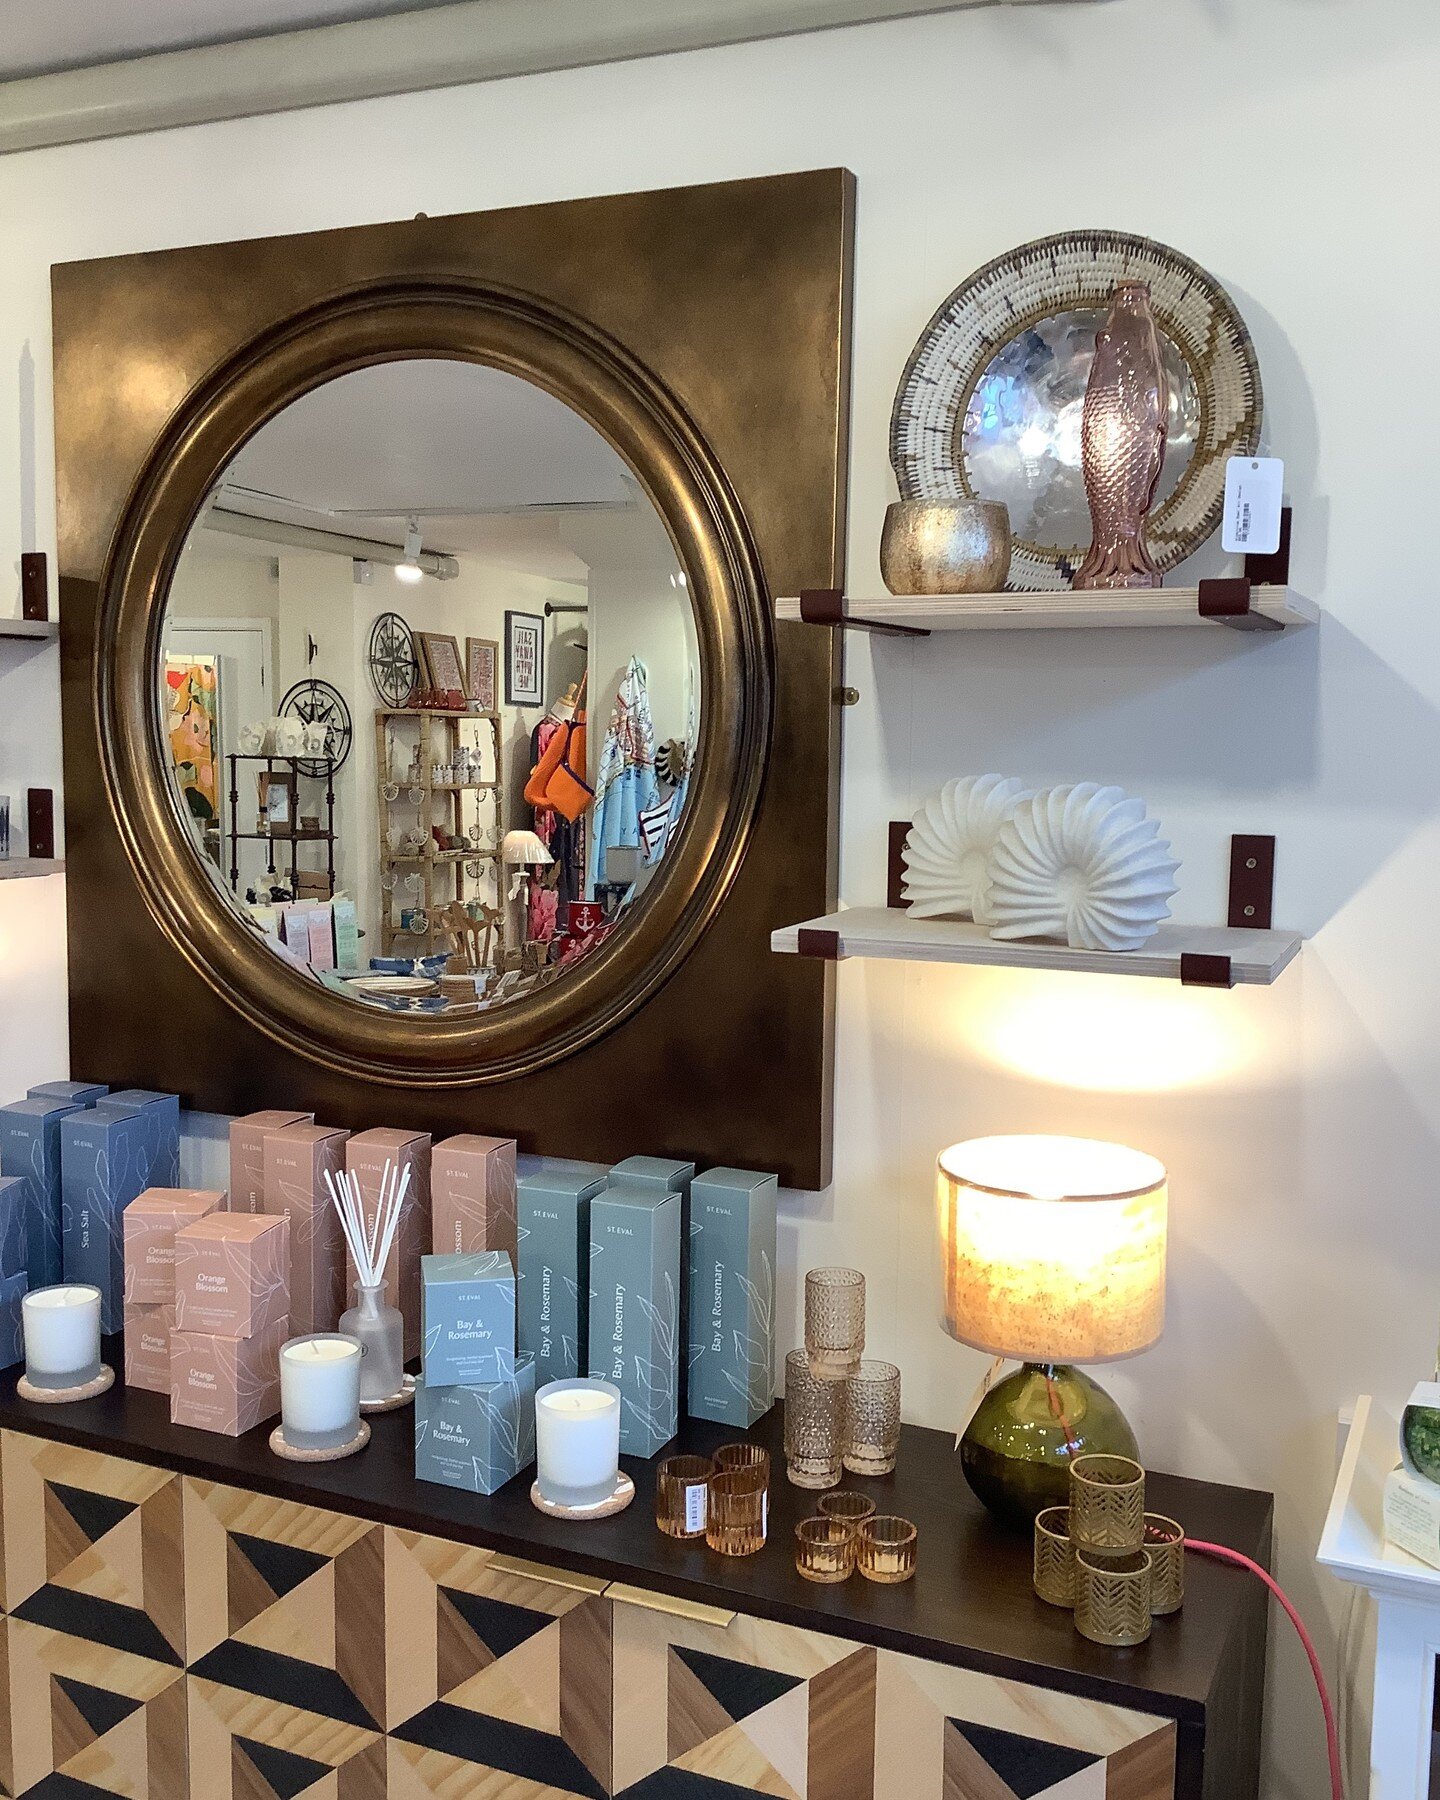 New display shelves in-store showcasing our lifestyle stock including our range of @stevalcandles and diffusers - perfect gifts for Mother&lsquo;s Day coming up this Sunday. #orlandosaldeburgh #homeware #lifestyle #homedecor #gifts #mothersday #lovey